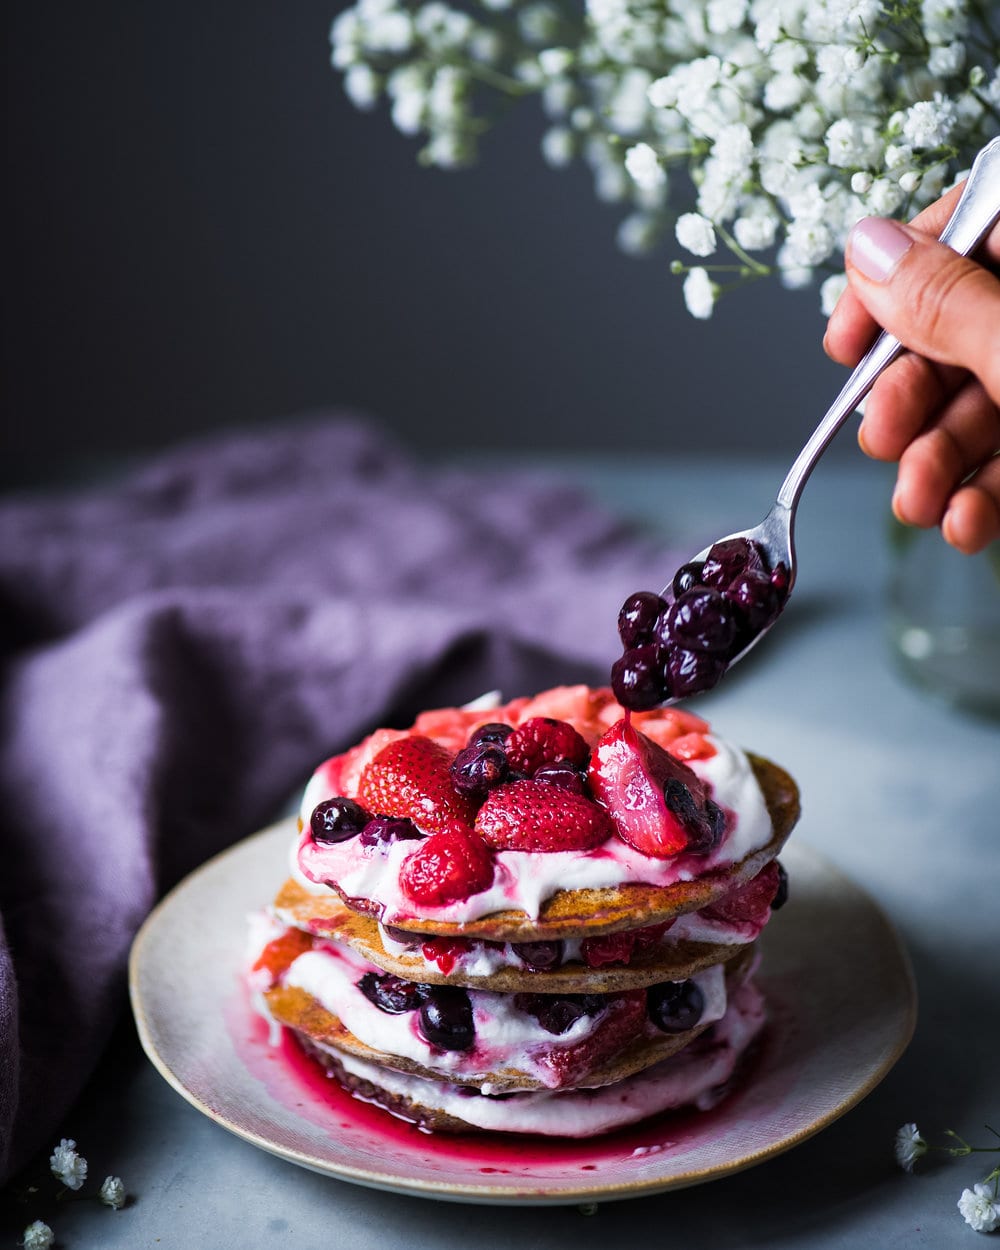 Hand spooning blueberries onto stack of pancakes with yogurt and berries on a grey plate.